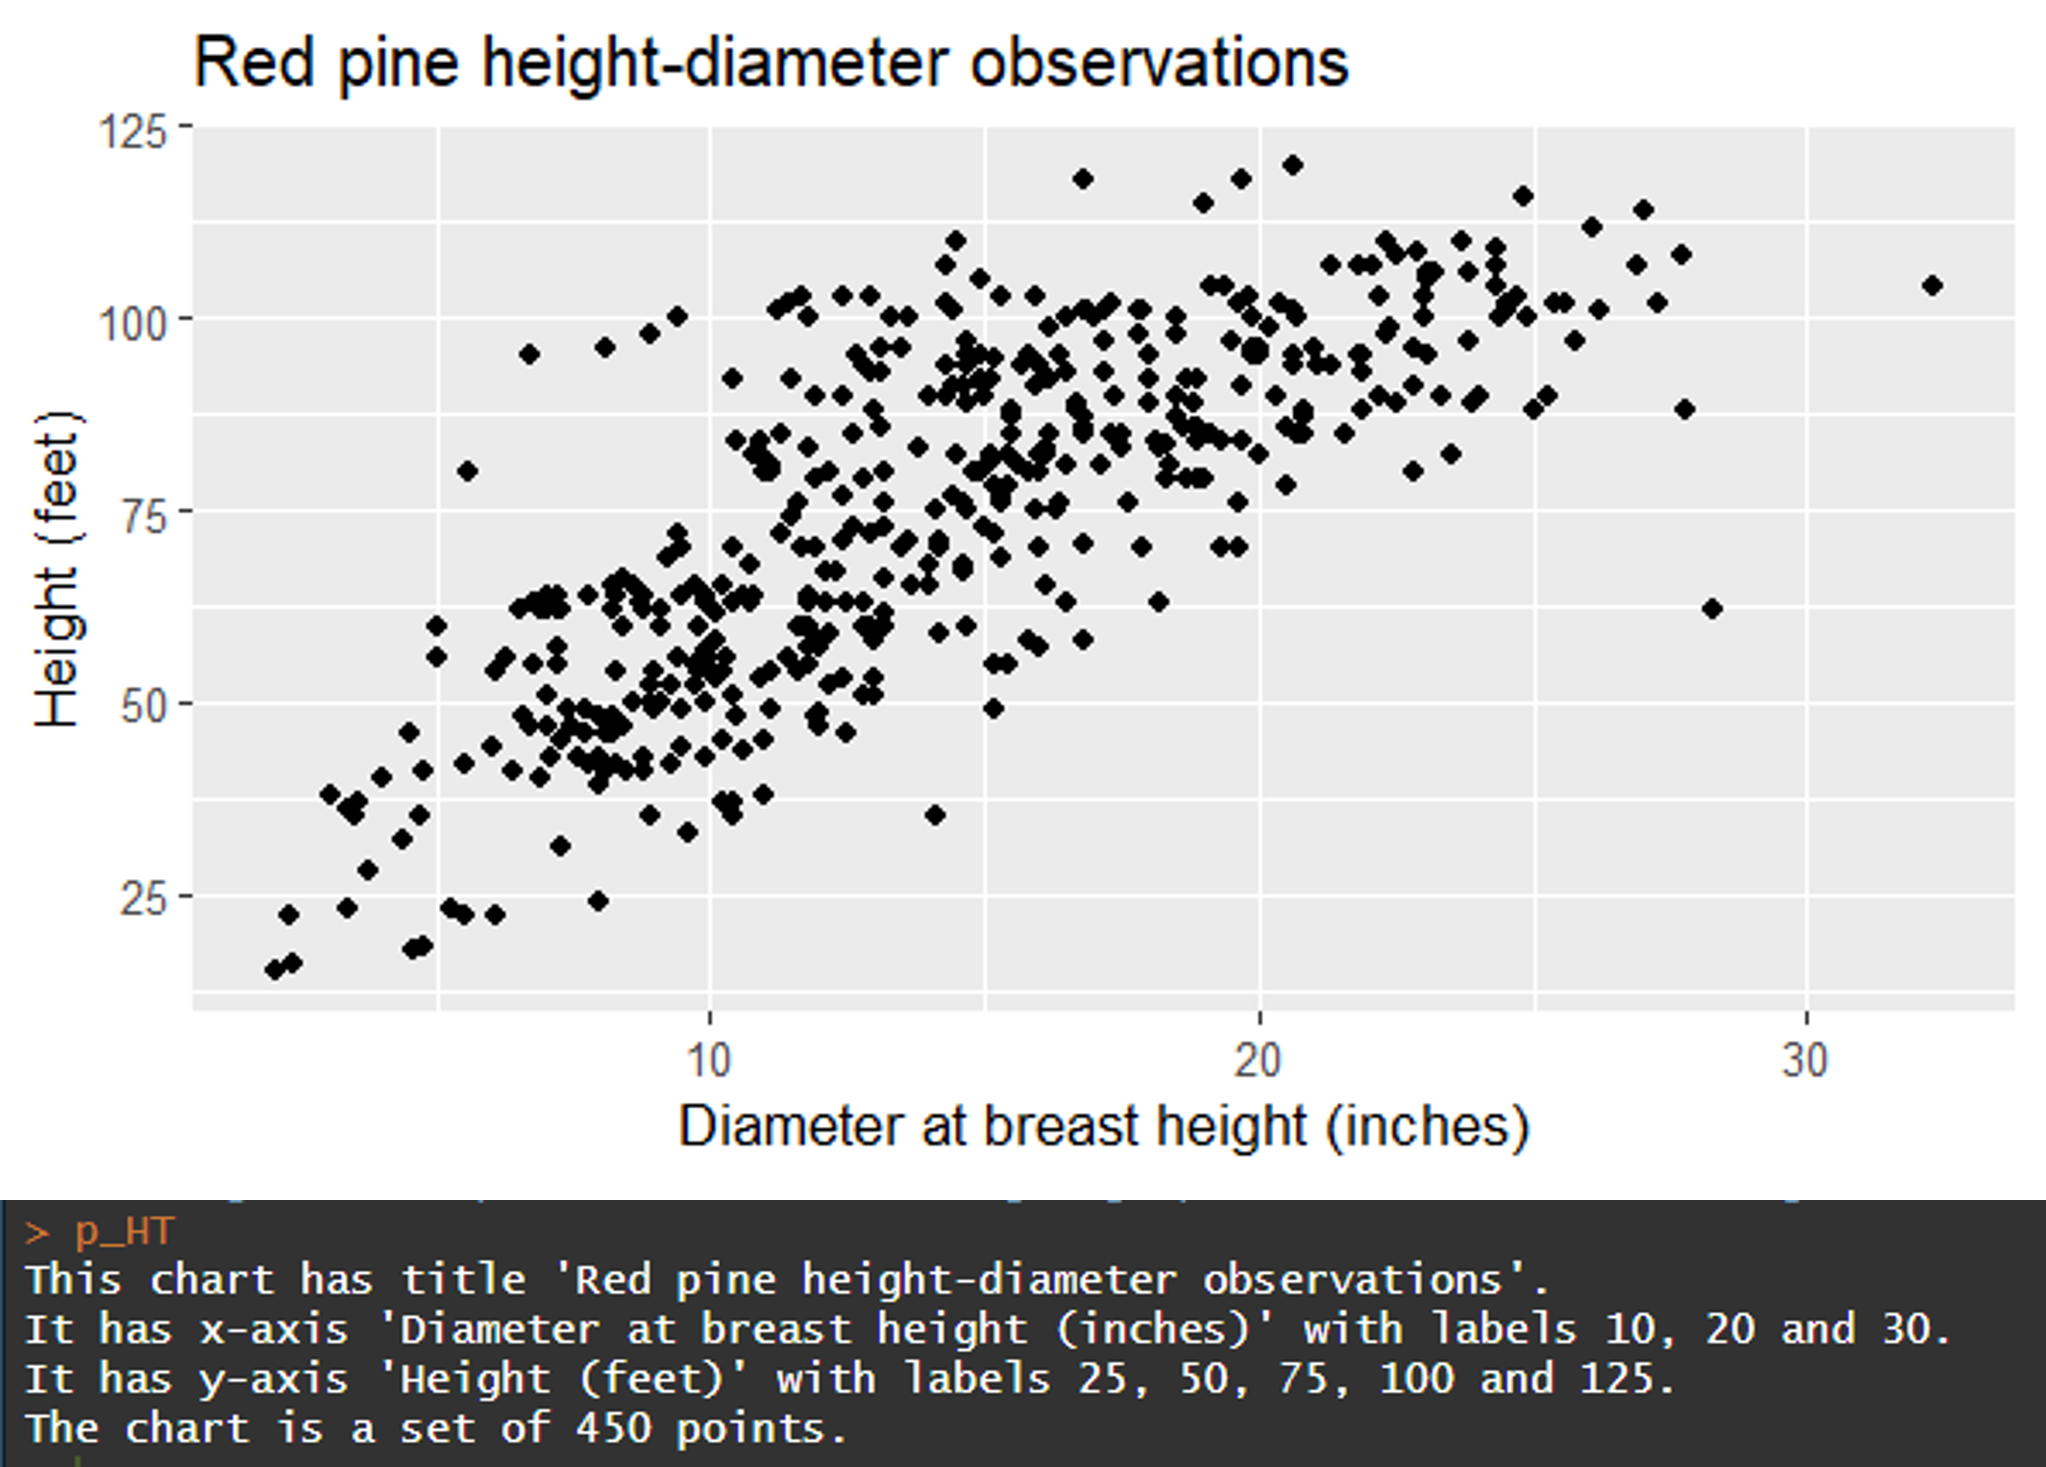 An example use of alt text for a scatterplot made in R, with description of the scatterplot provided by the BrailleR package below the graph.